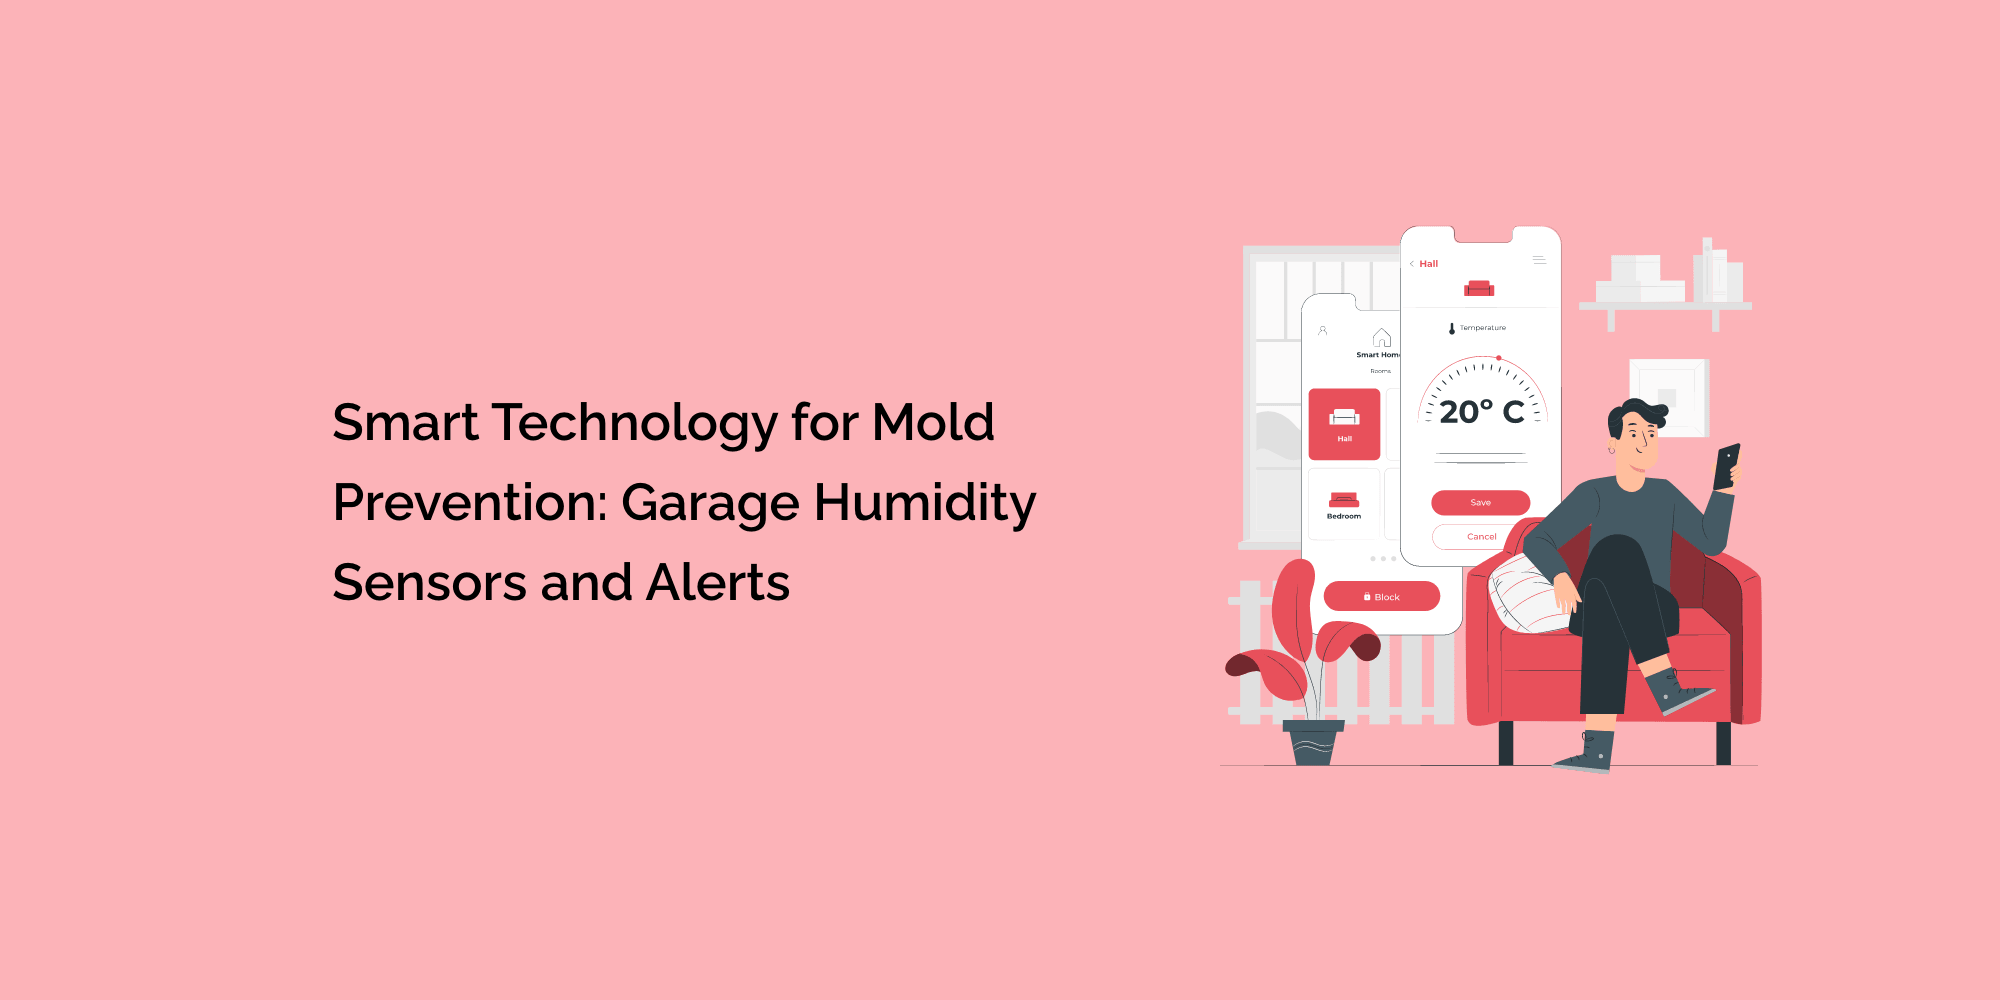 Smart Technology for Mold Prevention: Garage Humidity Sensors and Alerts